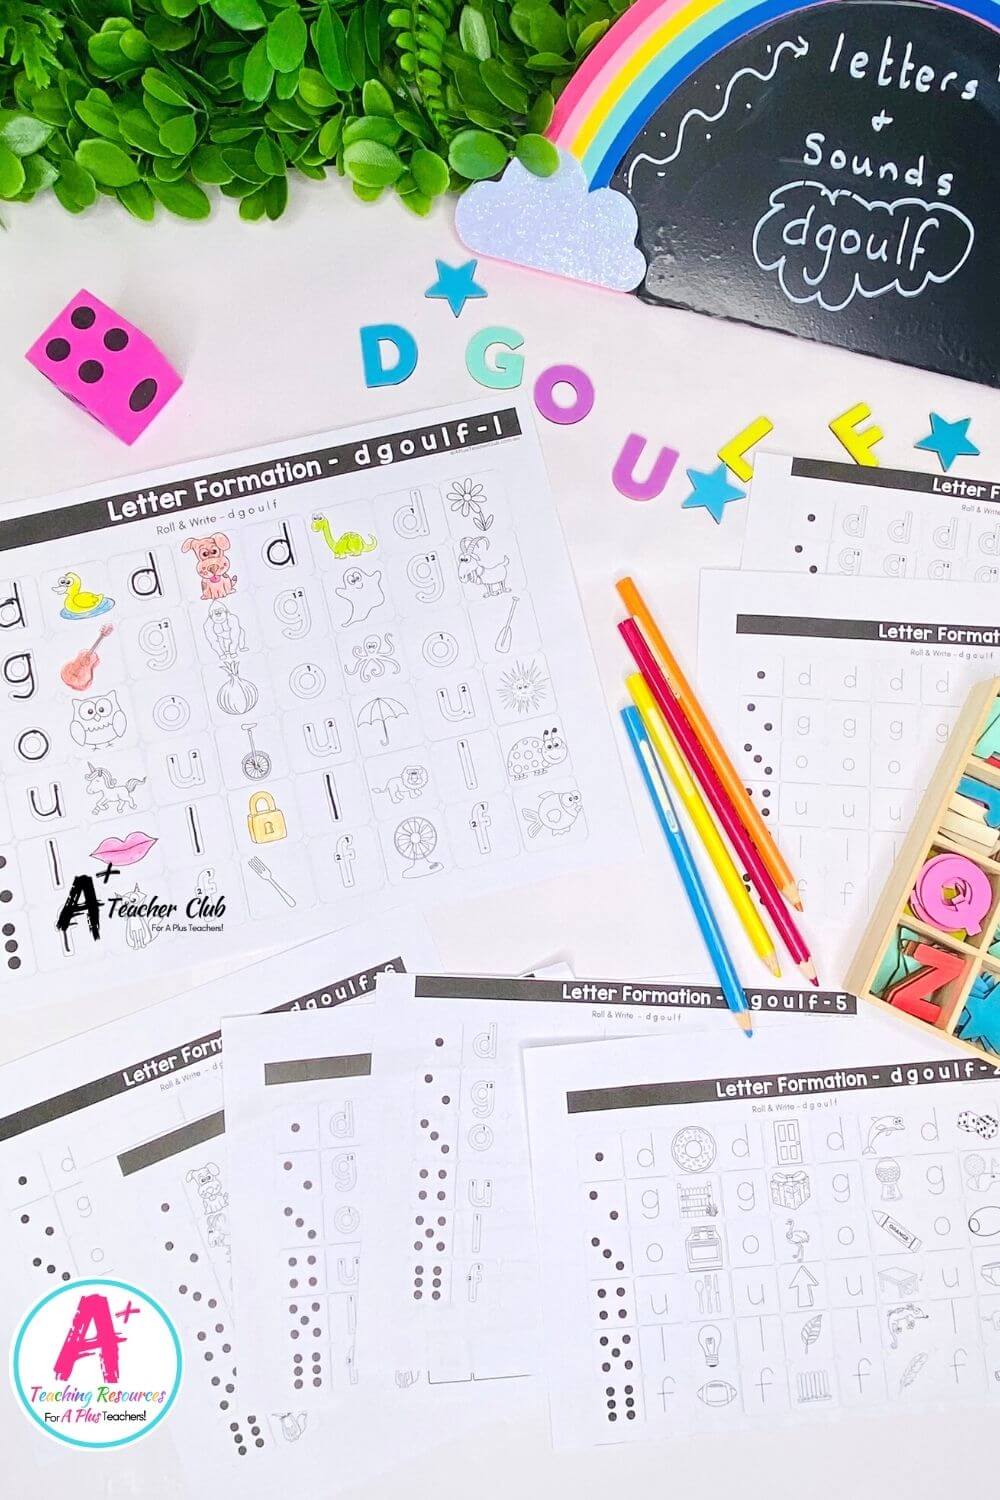 DGOULF Letter Formation Roll & Colour Dice Games (B&W)